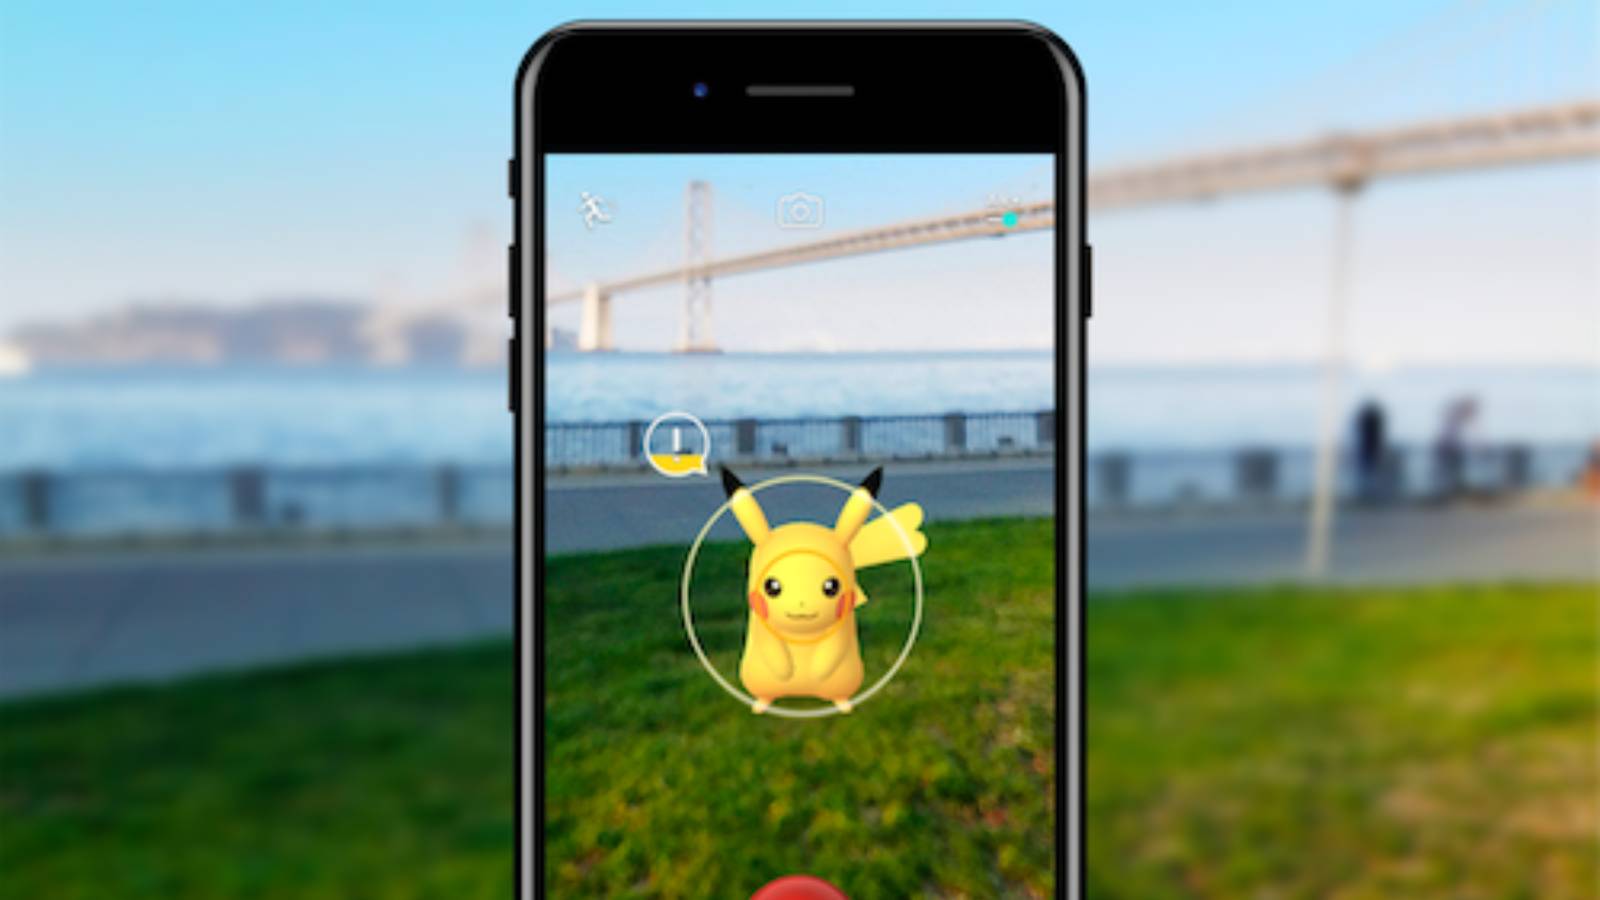 A phone is visible showing a Pokemon Go trainer catching a Pikachu